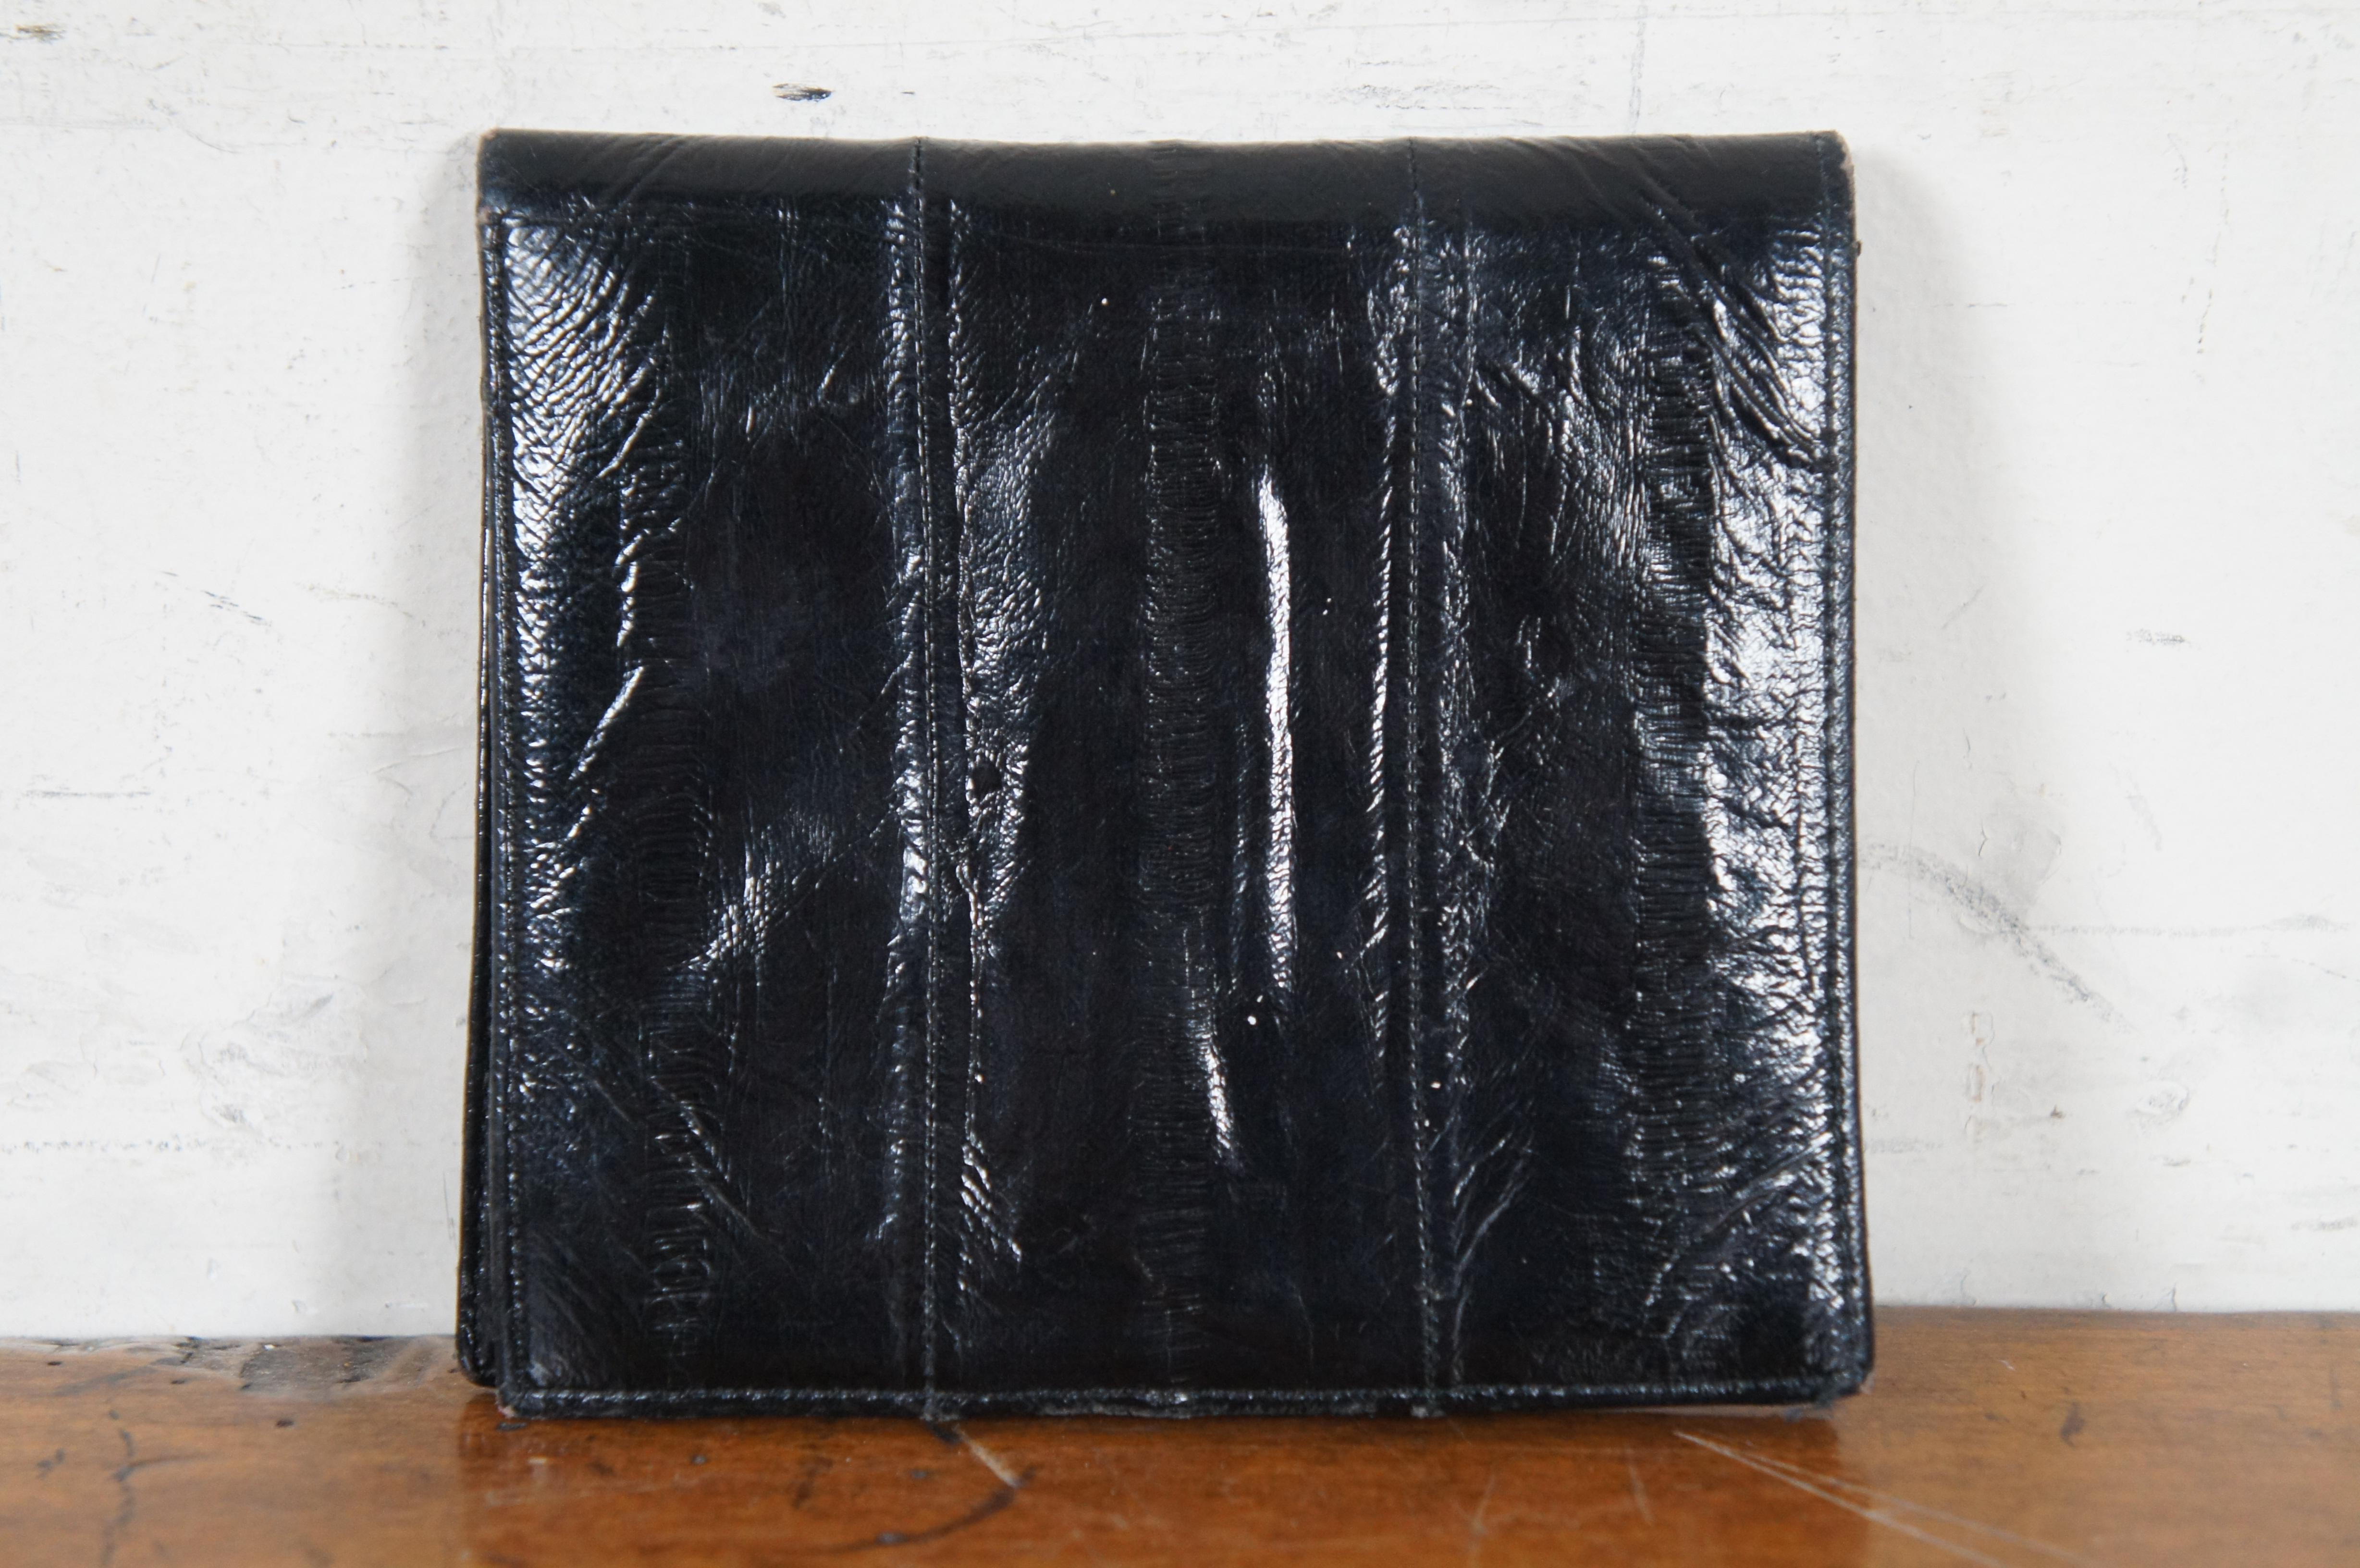 5 Vintage Eel Skin Soft Leather Clutch Coin Purses Billfold Wallet Pouch Bag For Sale 1